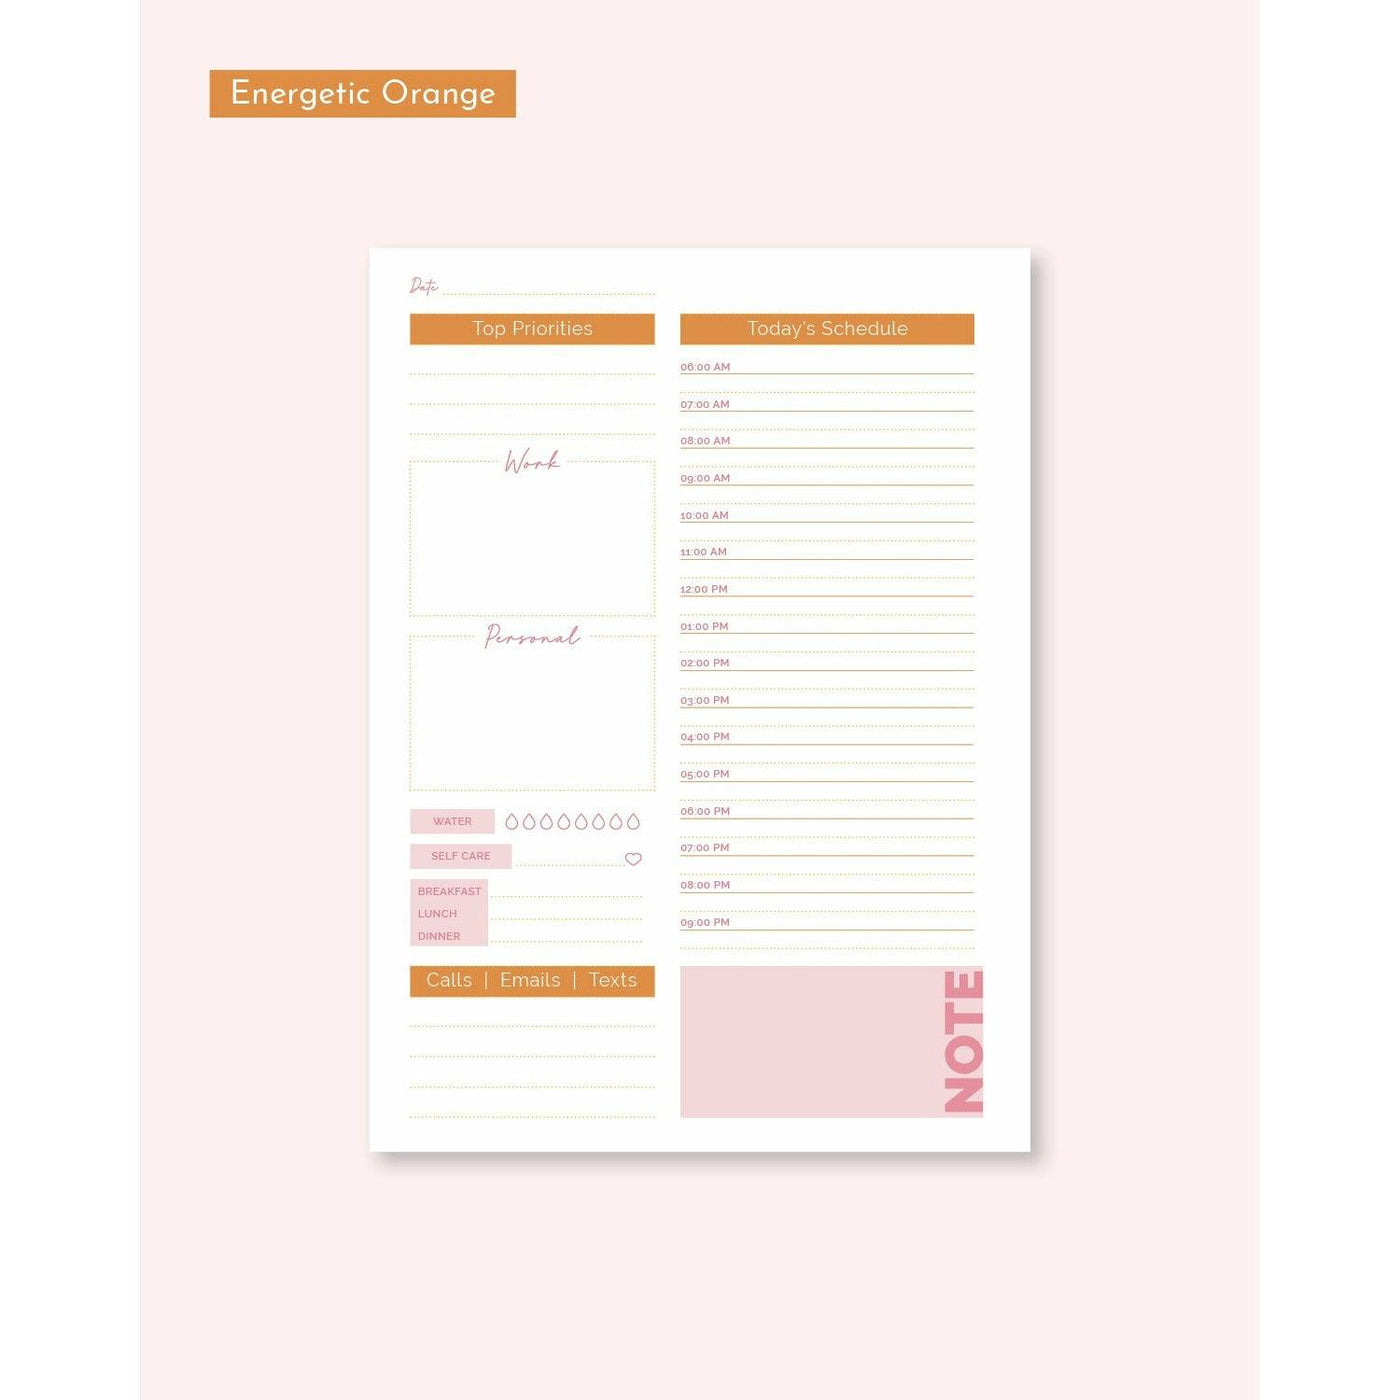 DAILY PLANNER INSERT - CLASSIC SIZE - QUARTERLY SUPPLY by Rongrong DeVoe- Energetic Orange